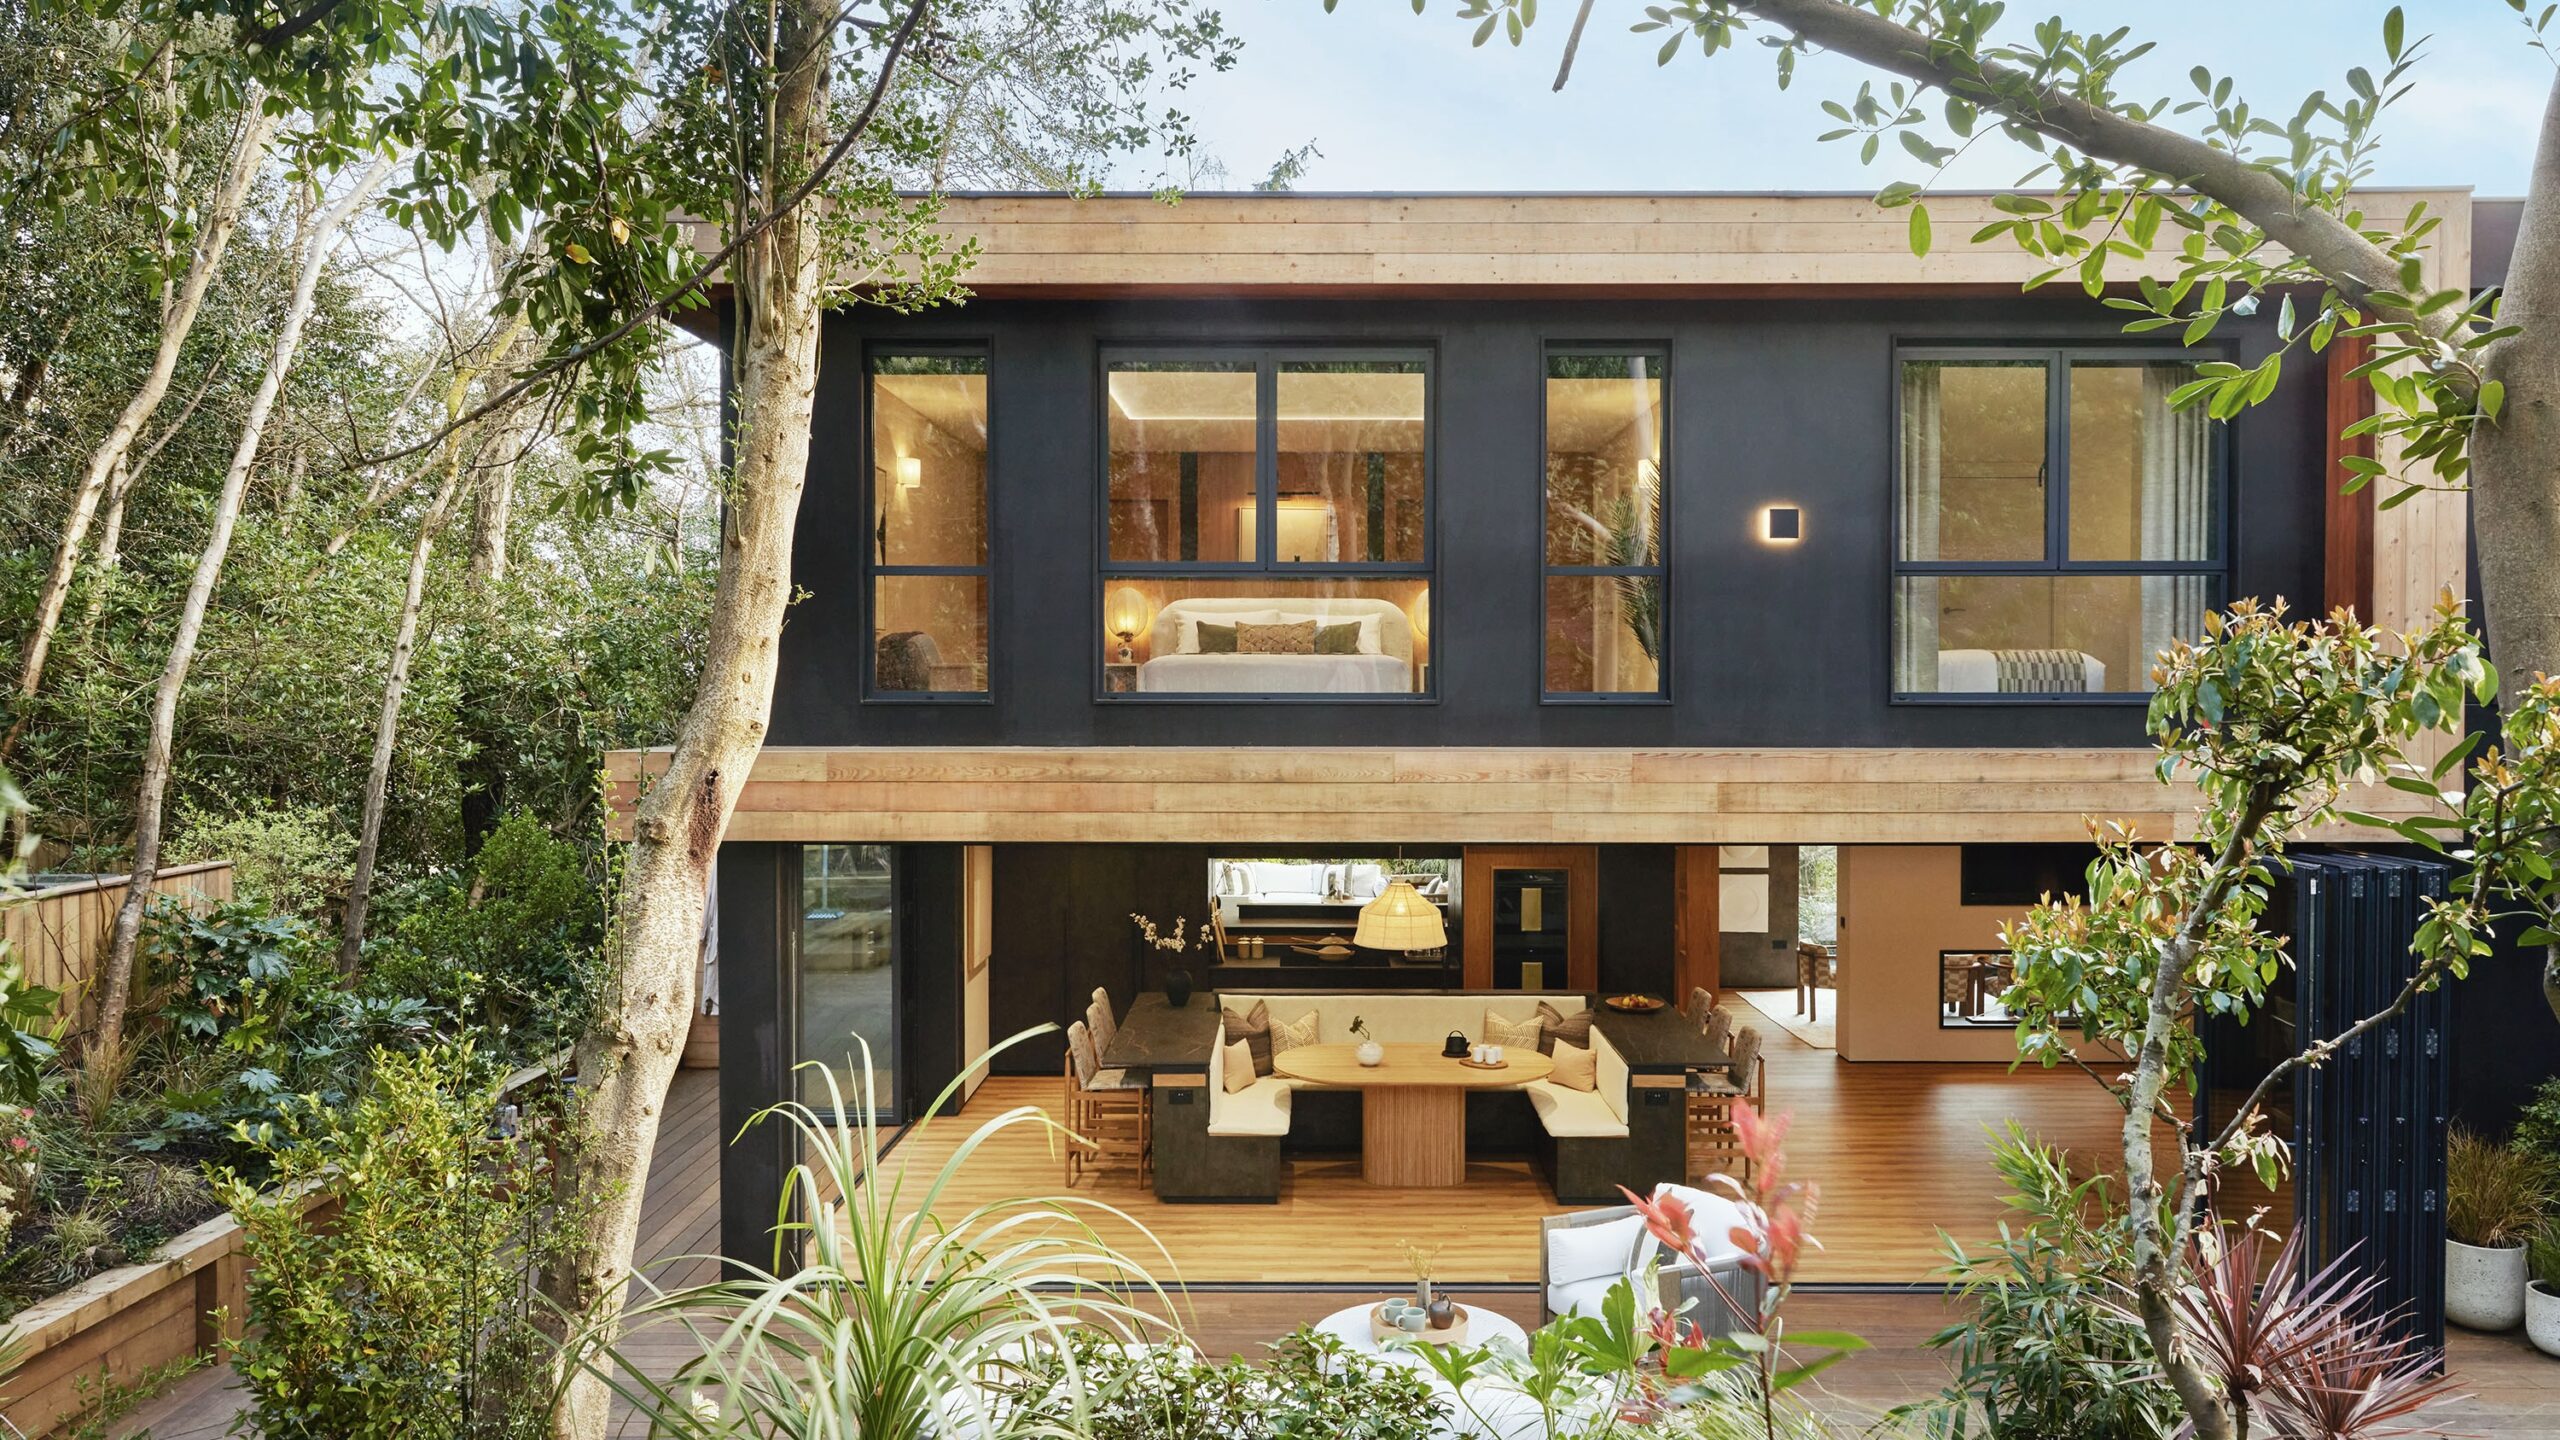 A black and wooden modern house